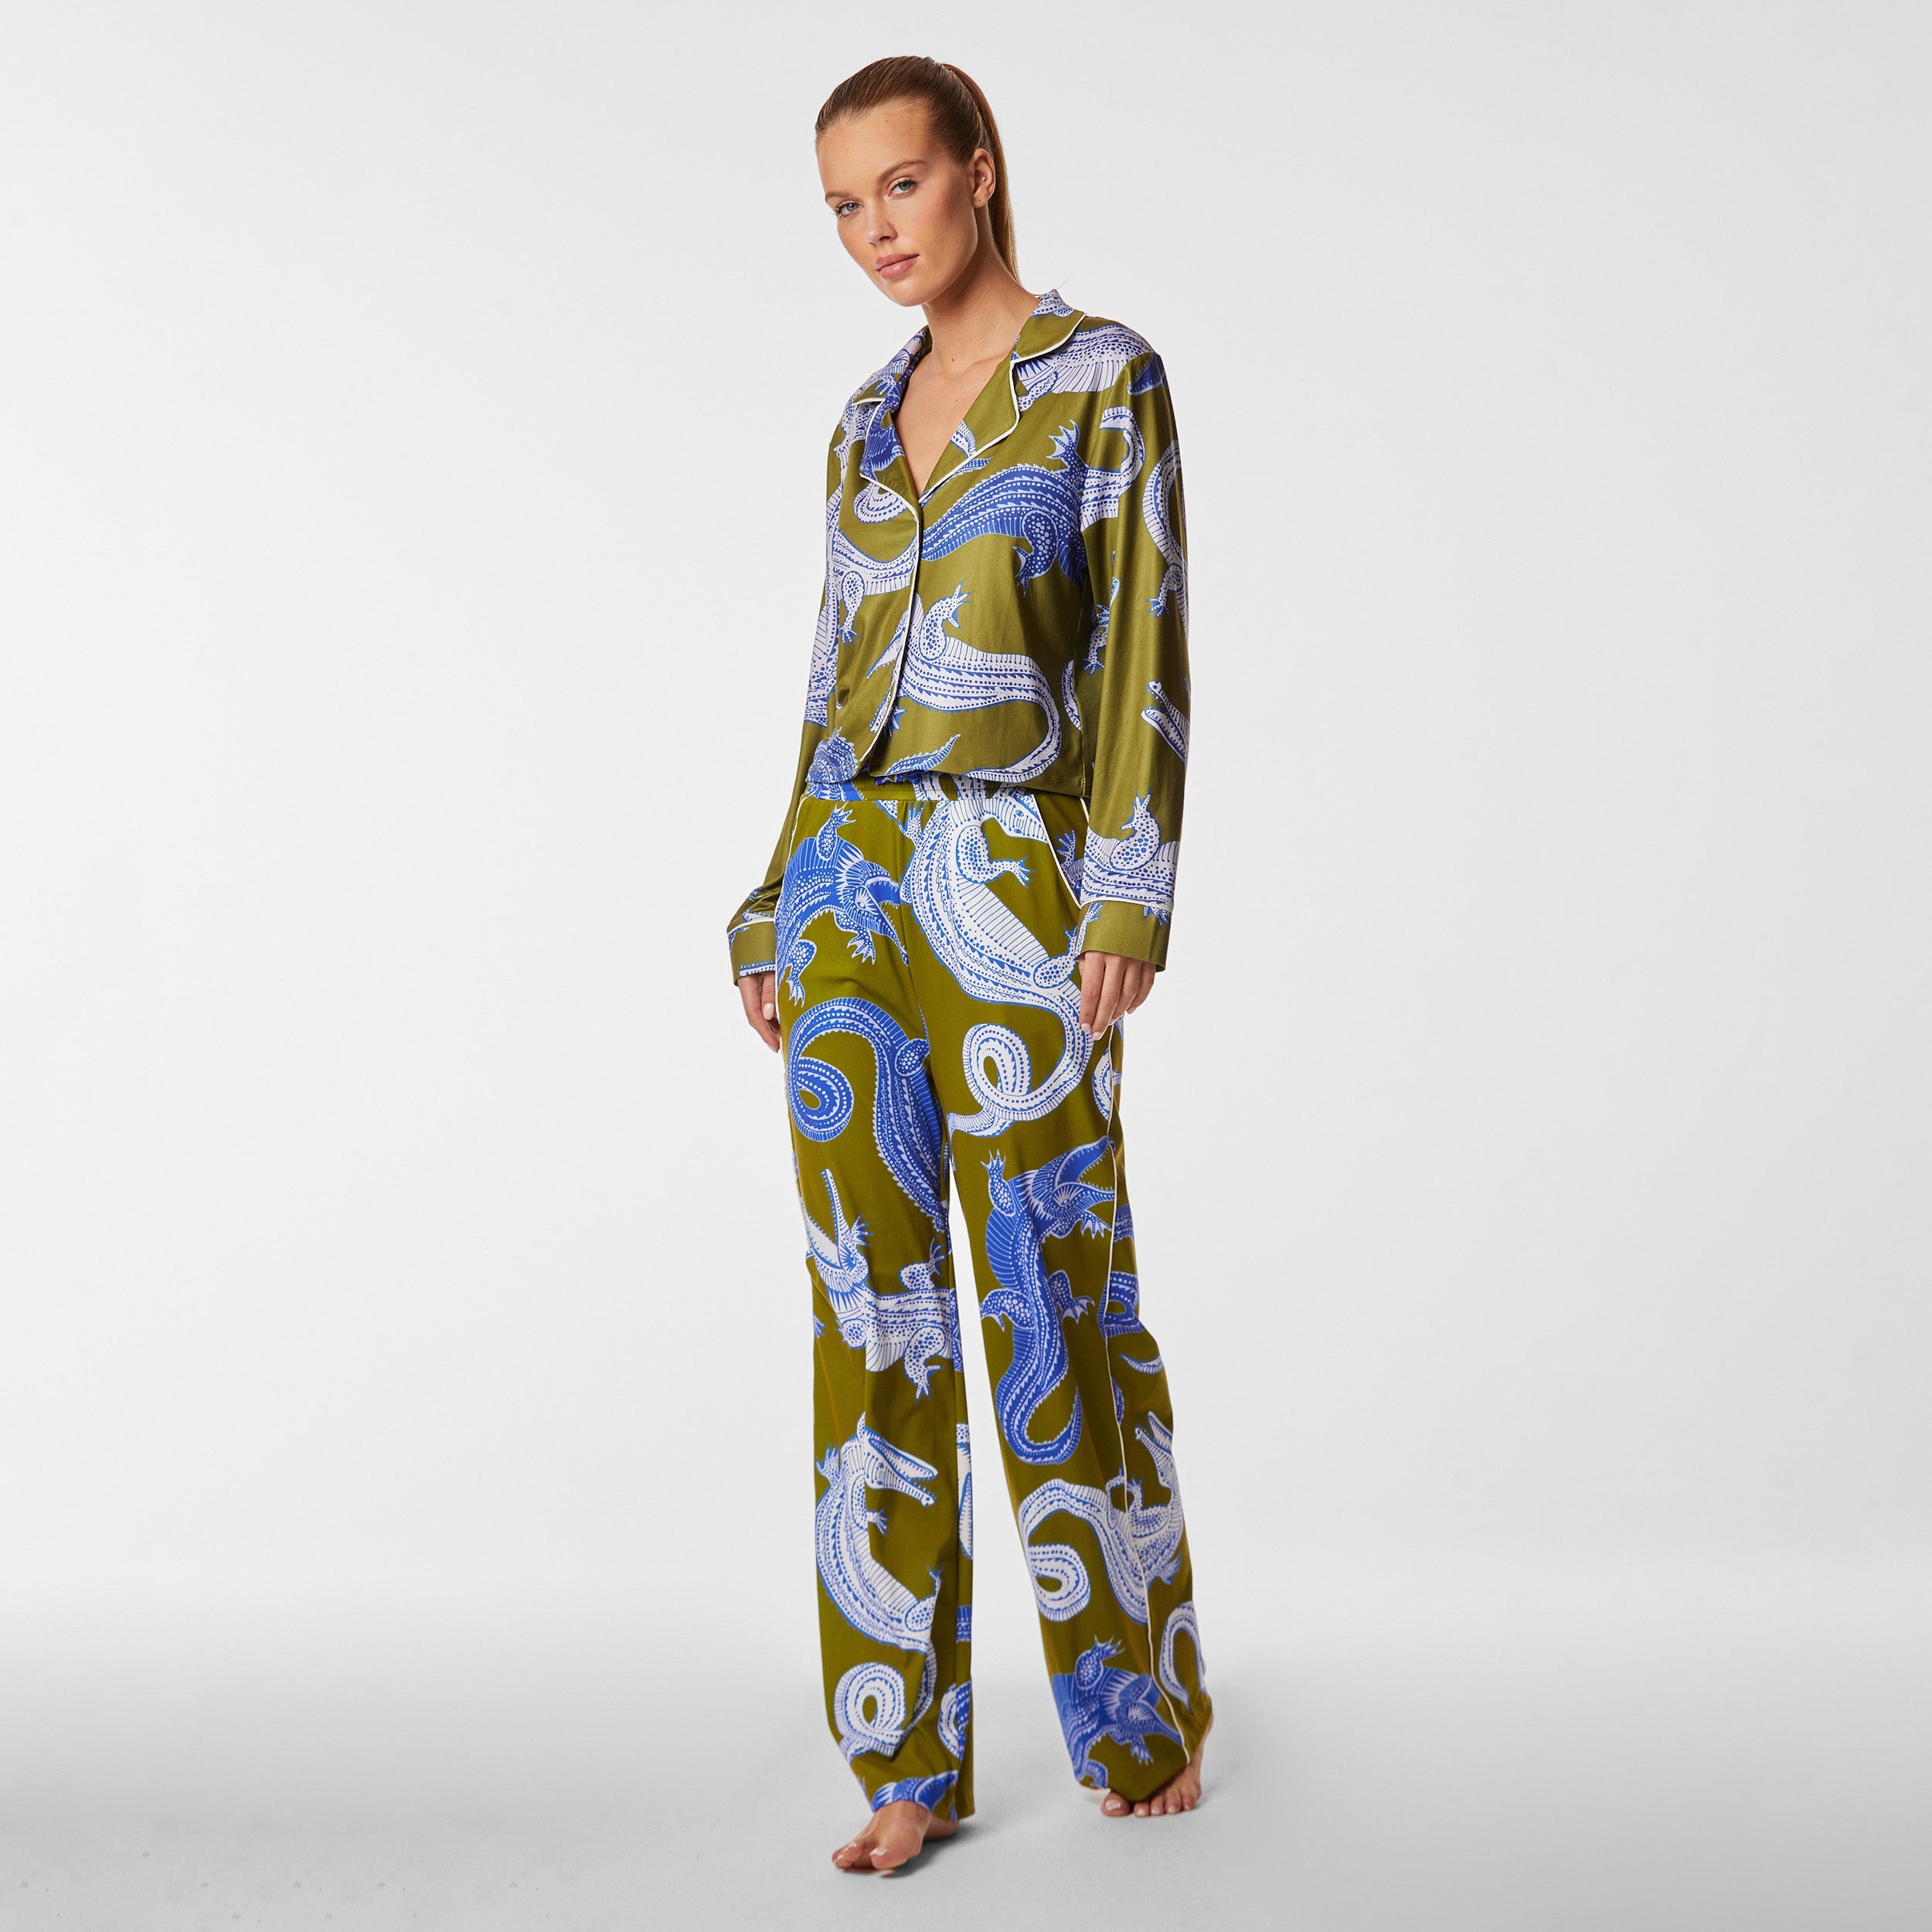 Full view of woman wearing breathable, relaxed and buttery smooth pajama pant featuring high-waist cut, side pockets, front tie and stunning Nile gator print.